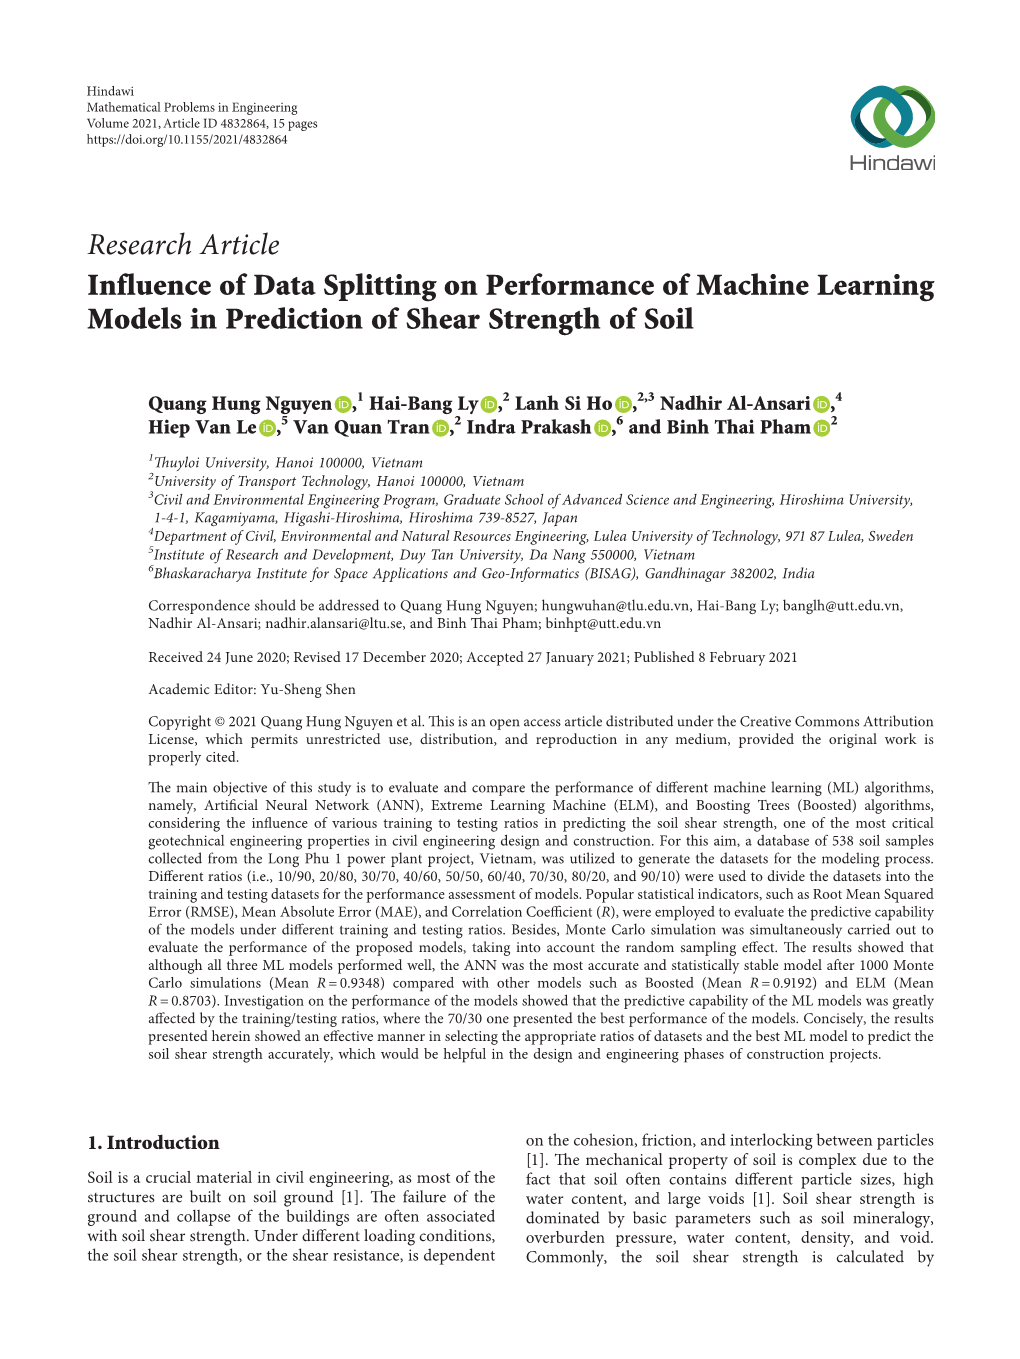 Influence of Data Splitting on Performance of Machine Learning Models in Prediction of Shear Strength of Soil